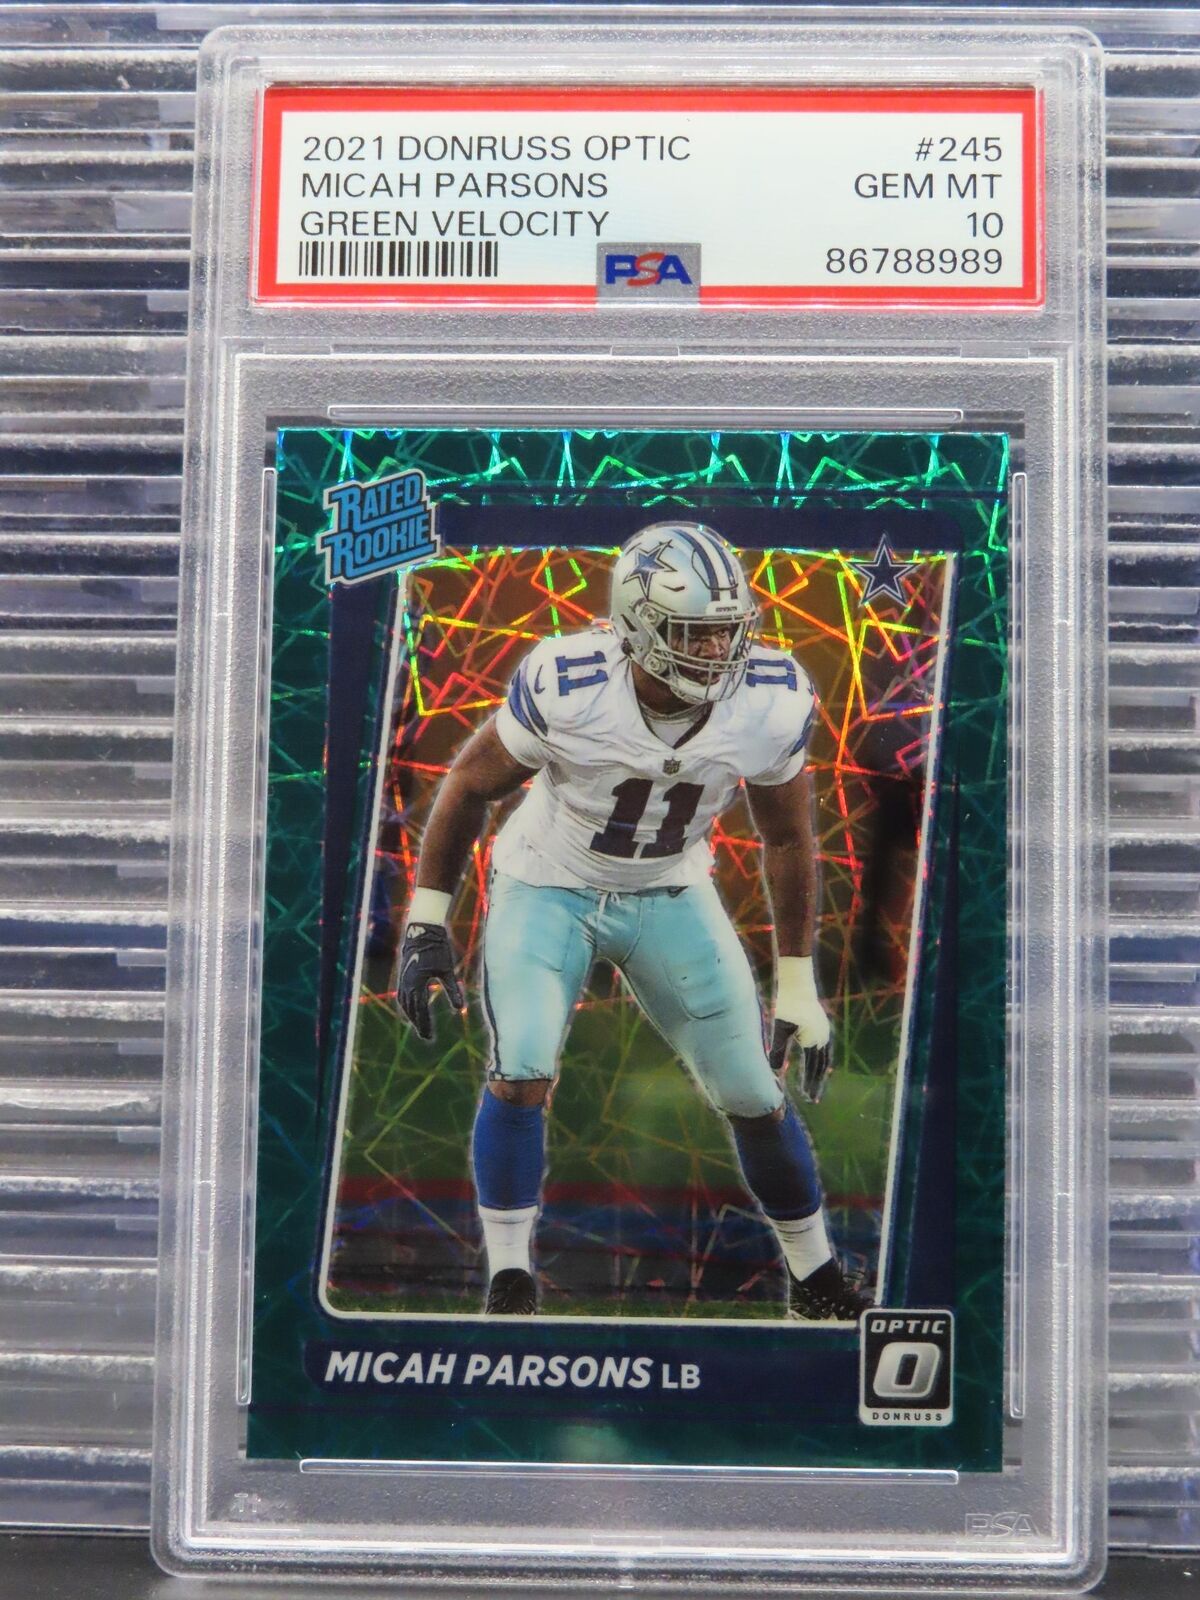 2021 Donruss Optic Micah Parsons Green Velocity Prizm Rated Rookie RC 245 PSA 10